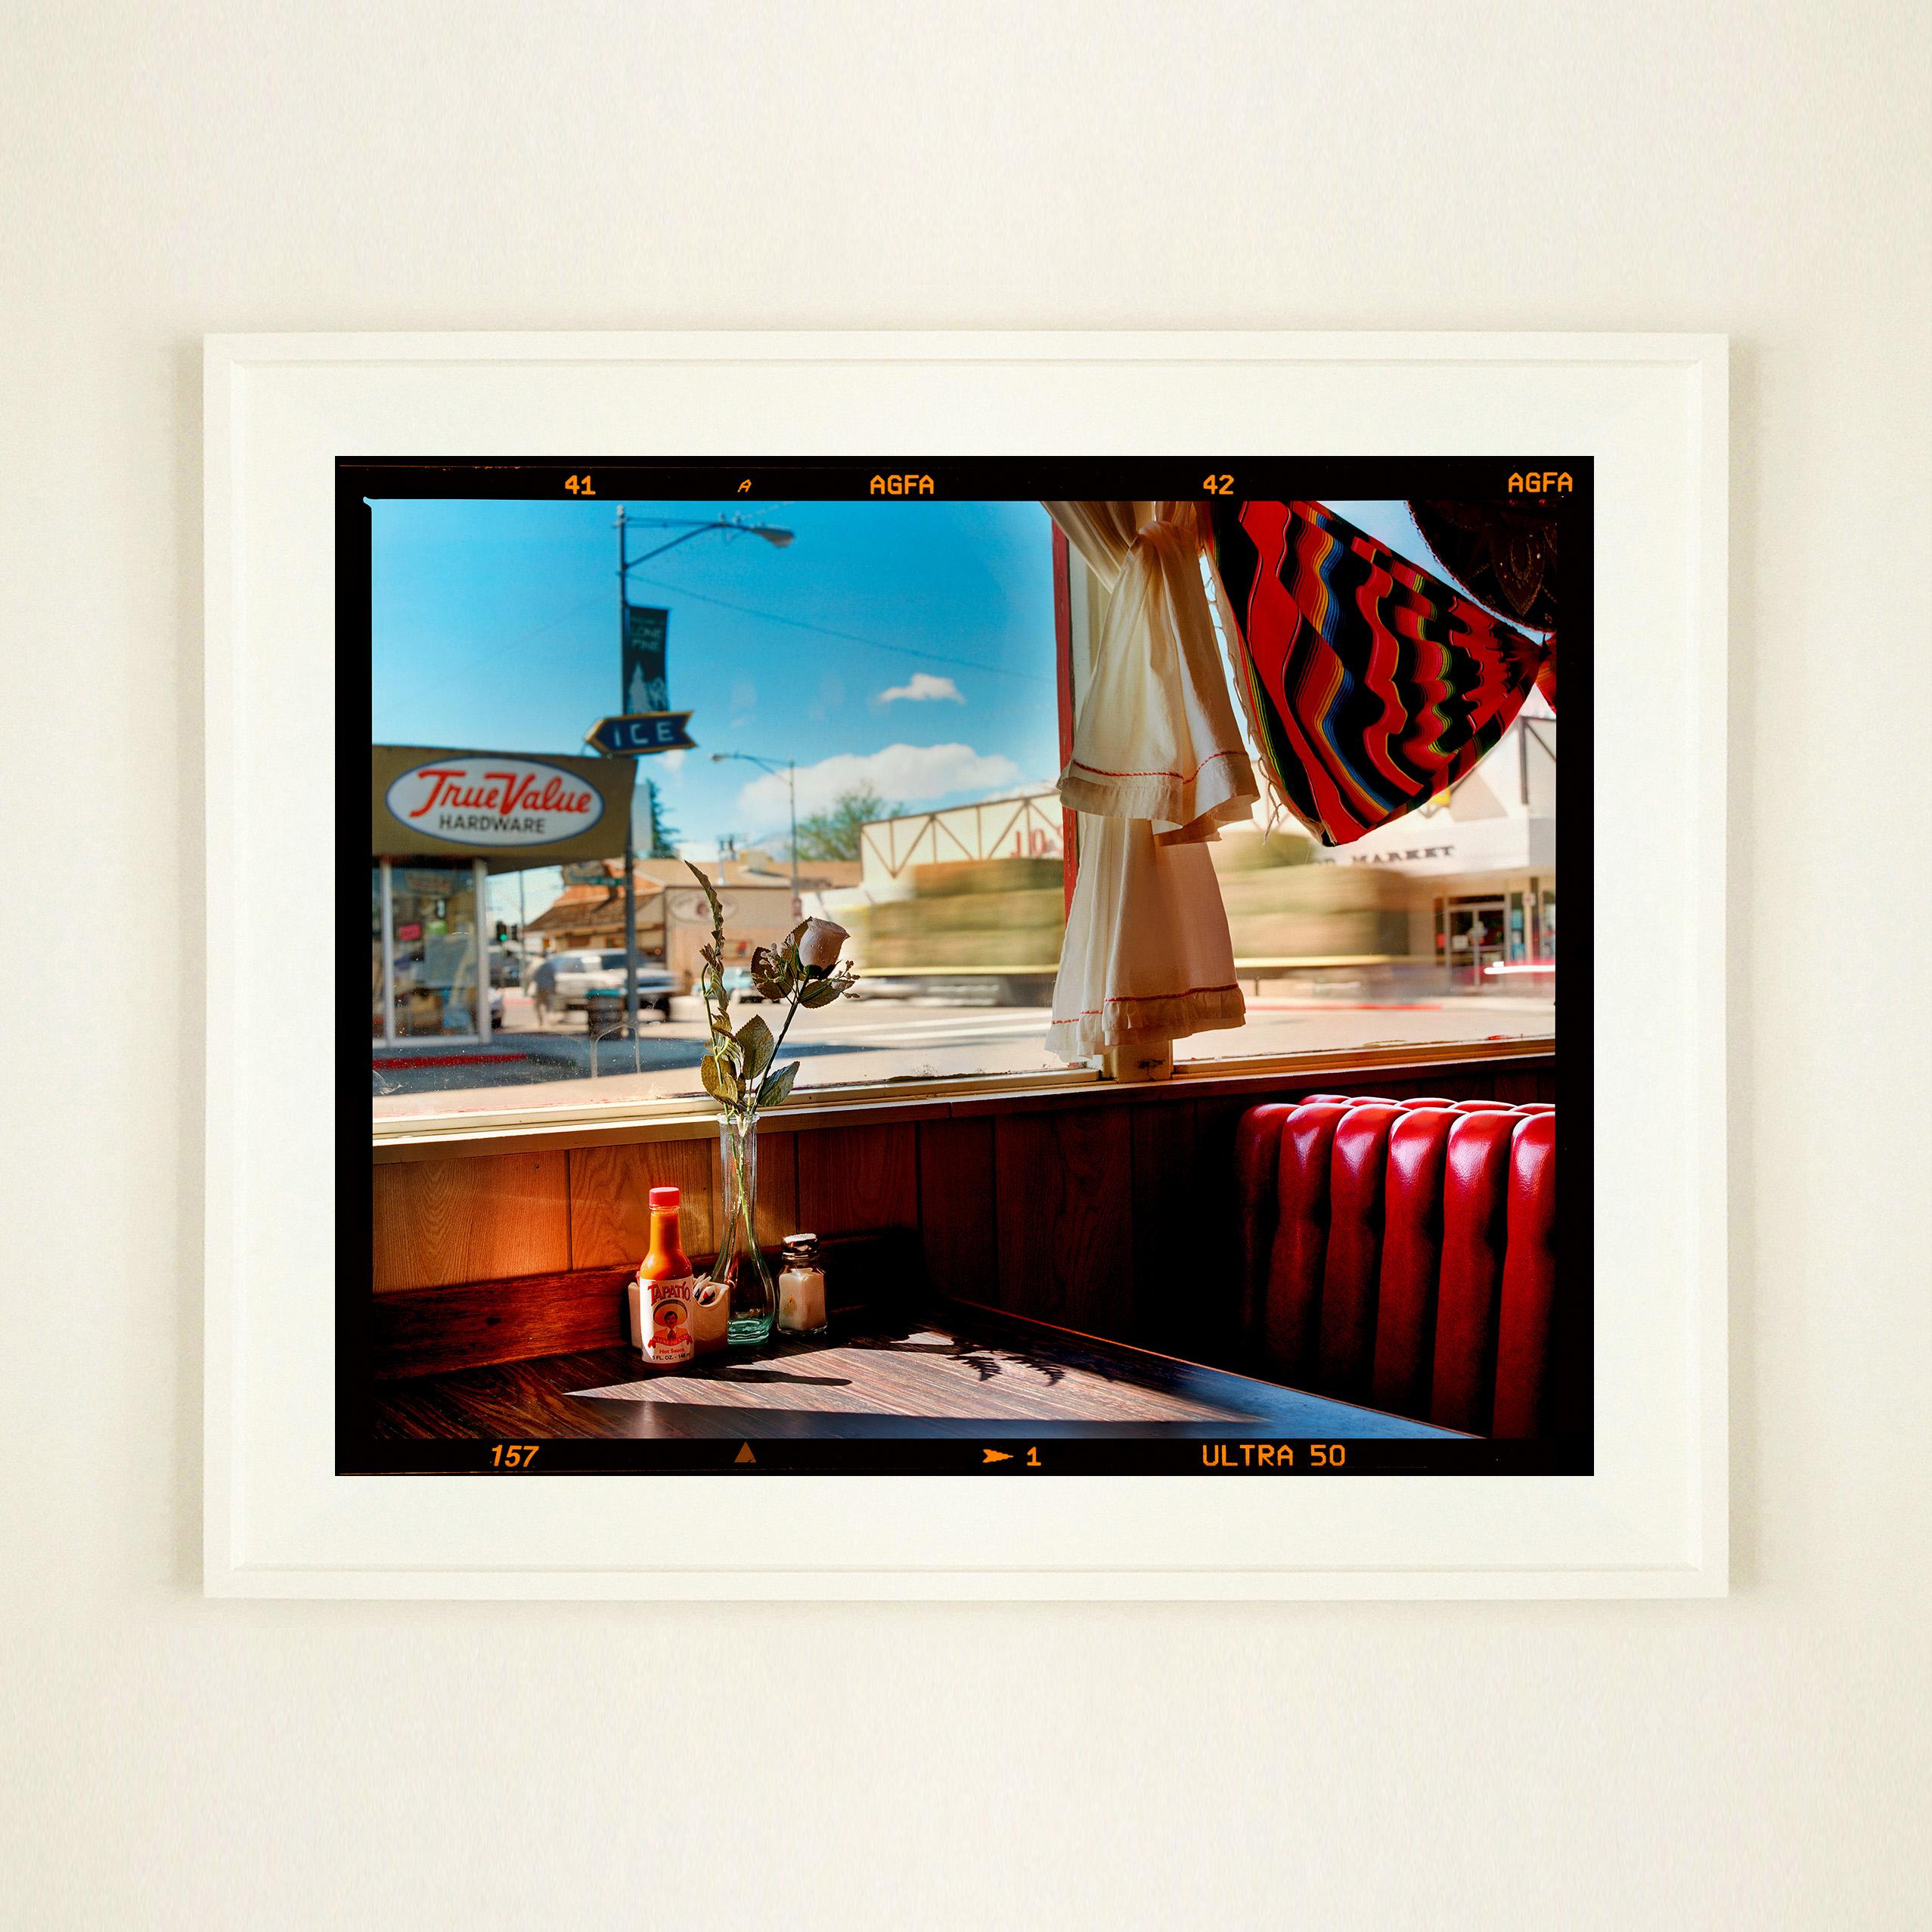 Bonanza Café, iconic photograph from Richard Heeps Dream in Colour series, it was the cover artwork on his book Man's Ruin. The photo takes you back to small town Americana with the sun soaking through the windows onto the classic red diner seating.